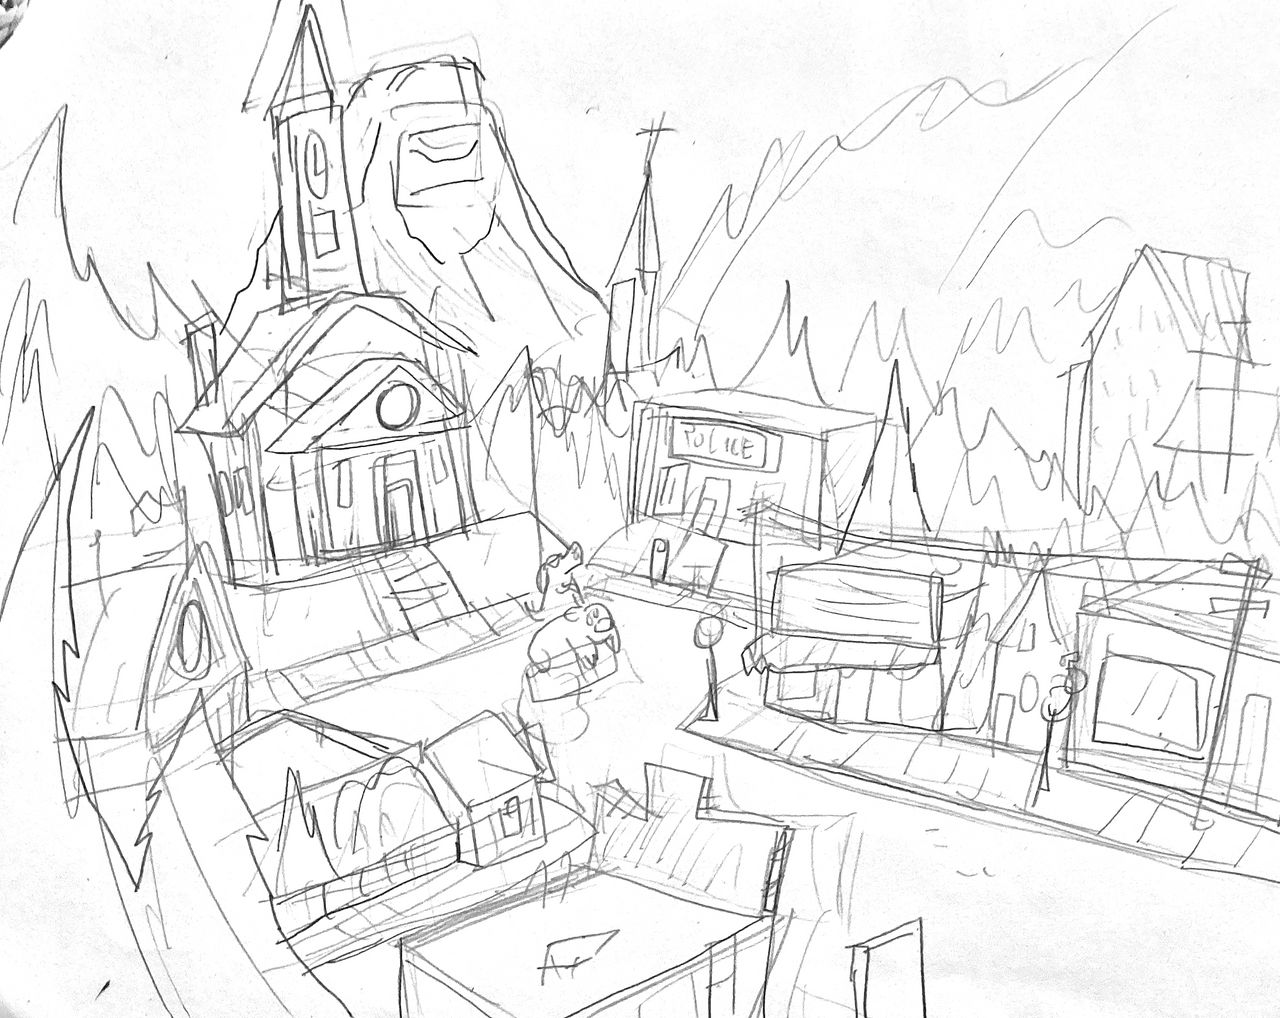 Houndhill Town Square Sketching by Perithefox10 on DeviantArt